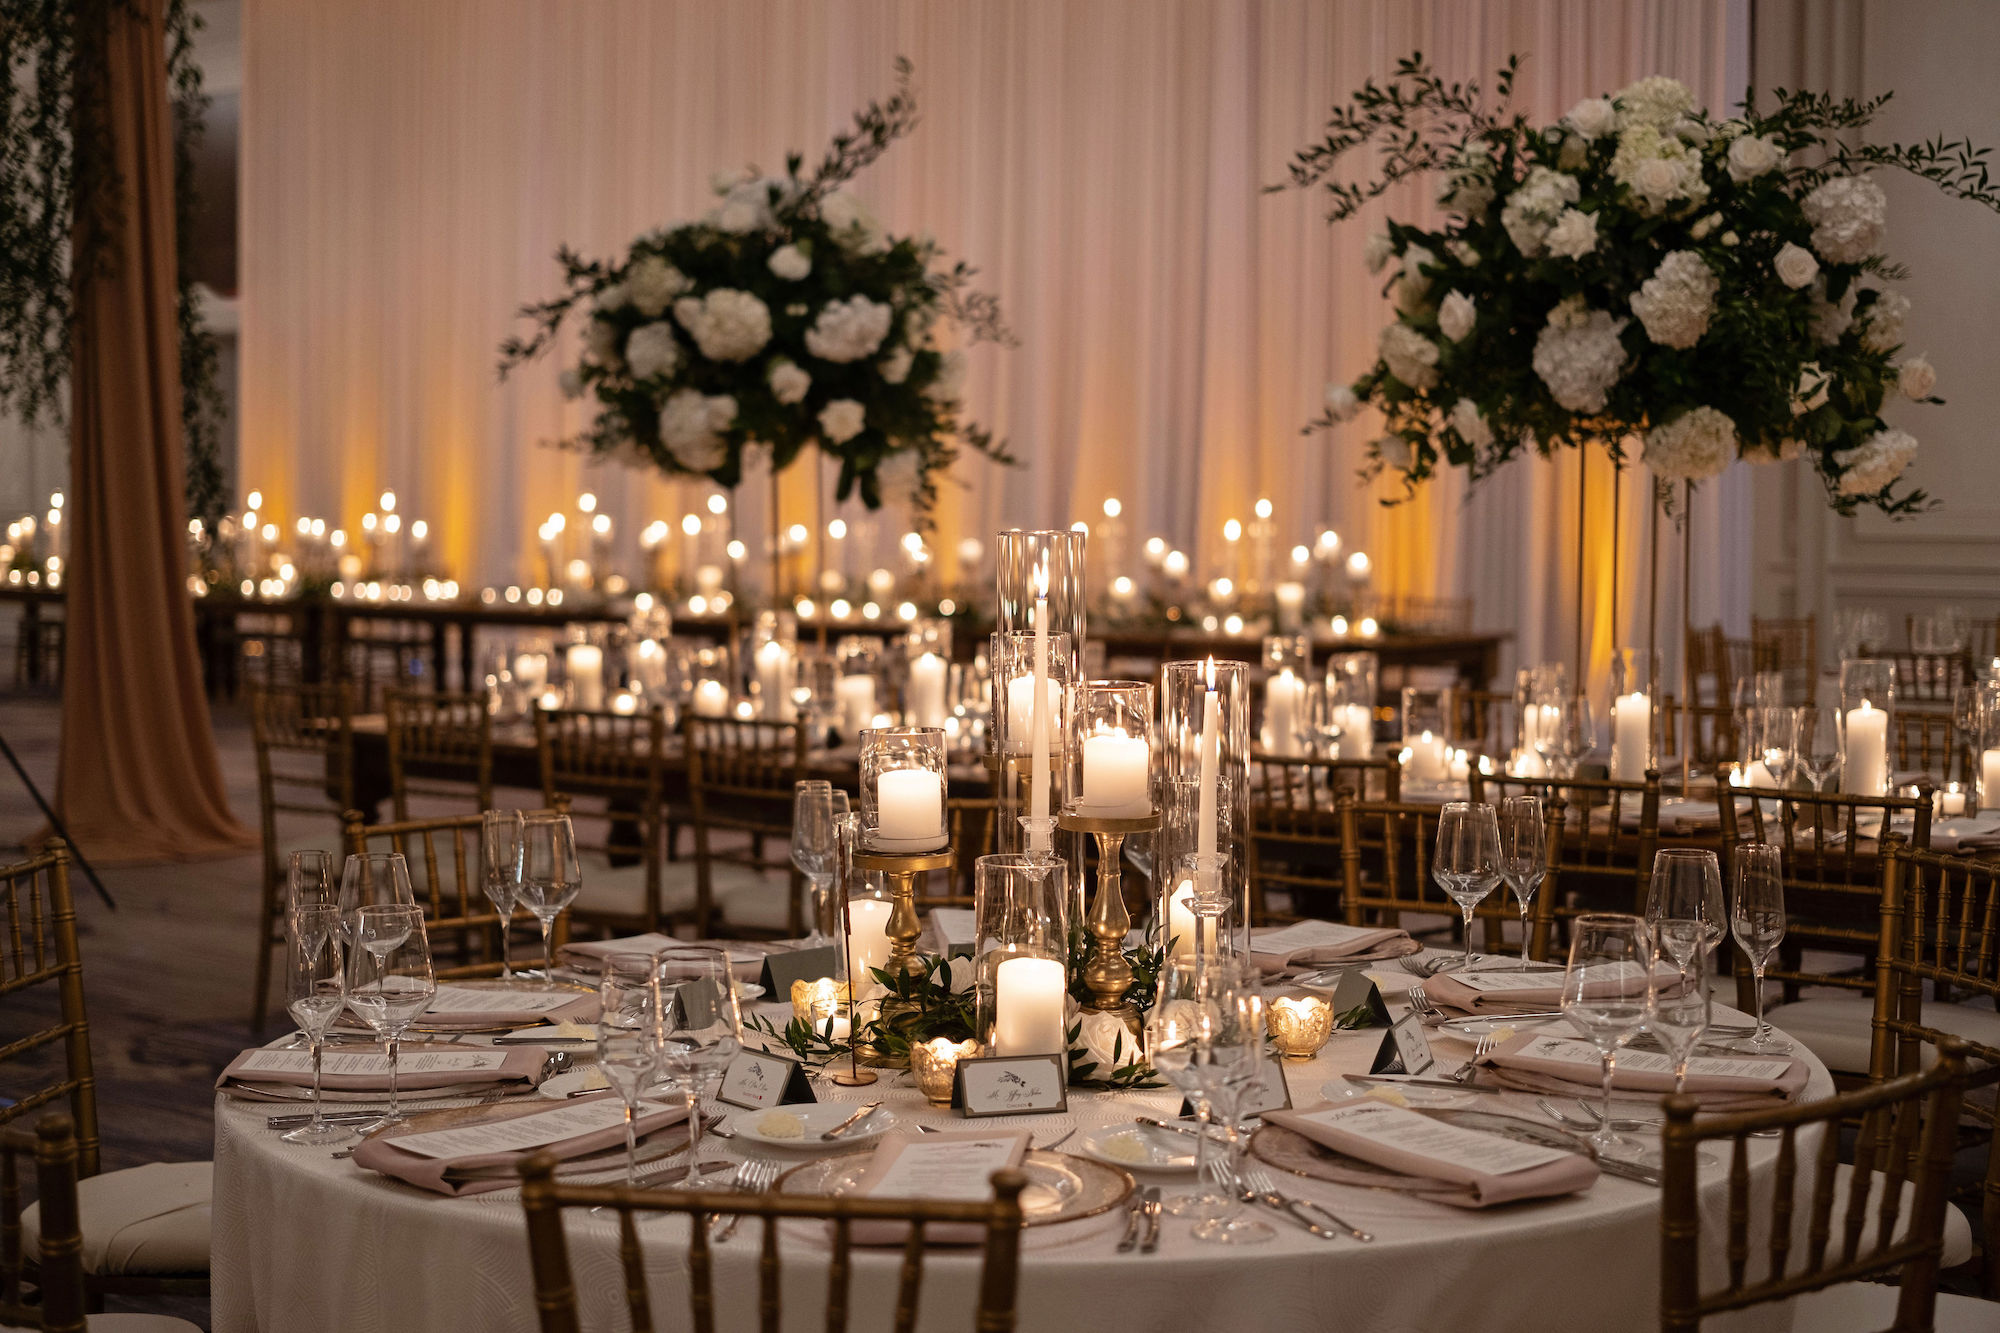 Elegant White Hydrangea and Rose Floral Arrangements with Ruscus Greenery | Candlelit Centerpieces | Tampa Bay Rental Company Gabro Event Services | A Chair Affair | Bruce Wayne Florals